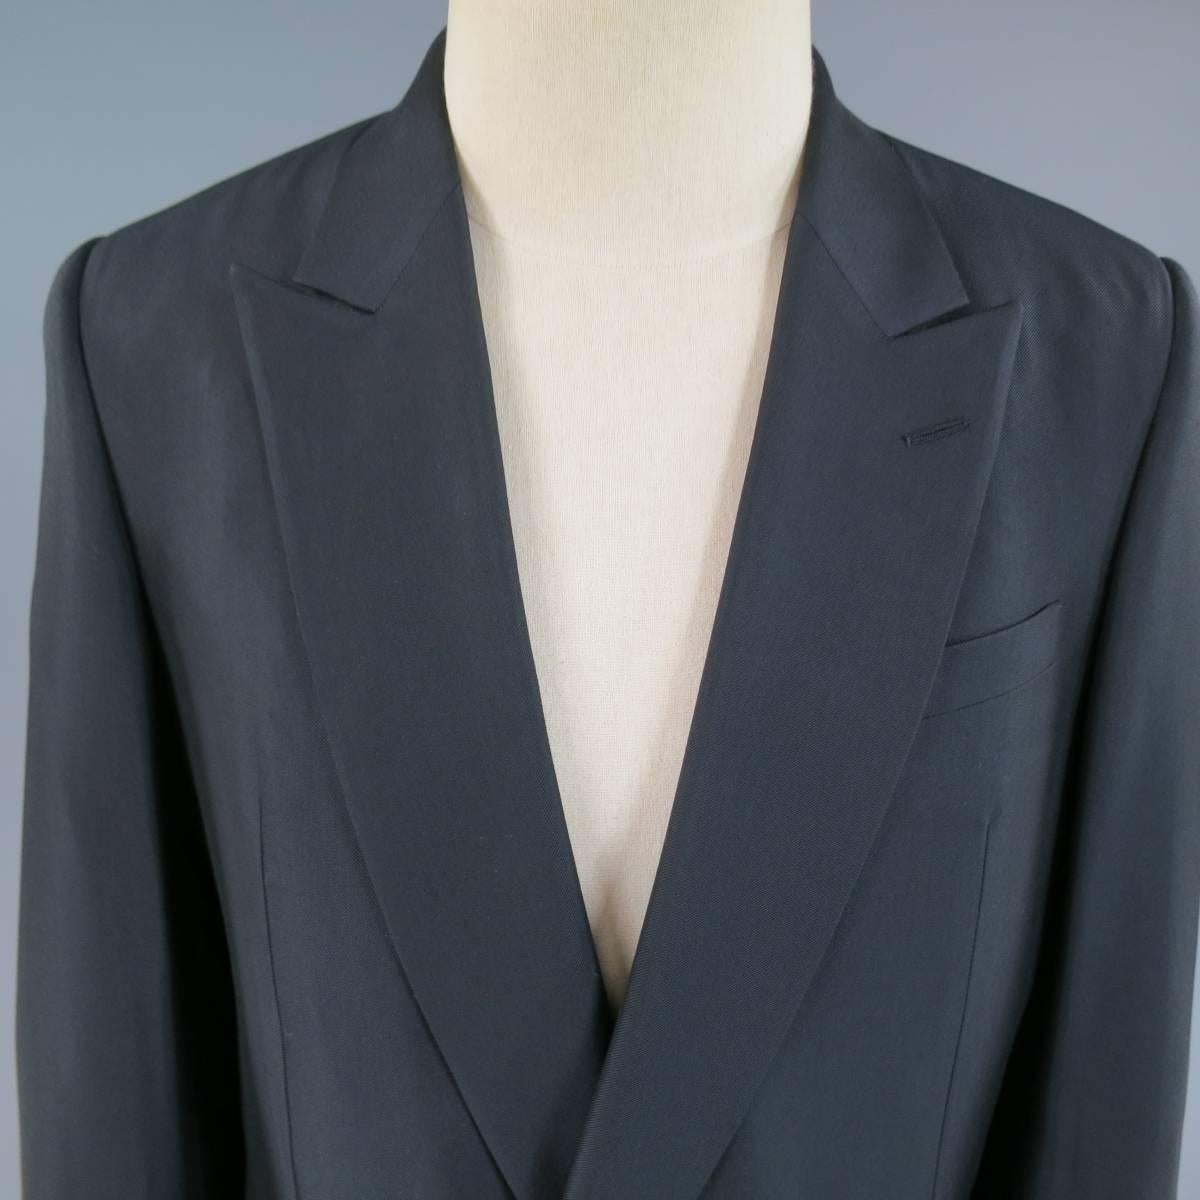 This chic BALENCIAGA double breasted sport coat comes in a deep midnight navy wool rayon blend twill with a sheen to it and features a pointed peak lapel, navy buttons, double flap pockets, and single vented back. Made in Italy.
Retails at